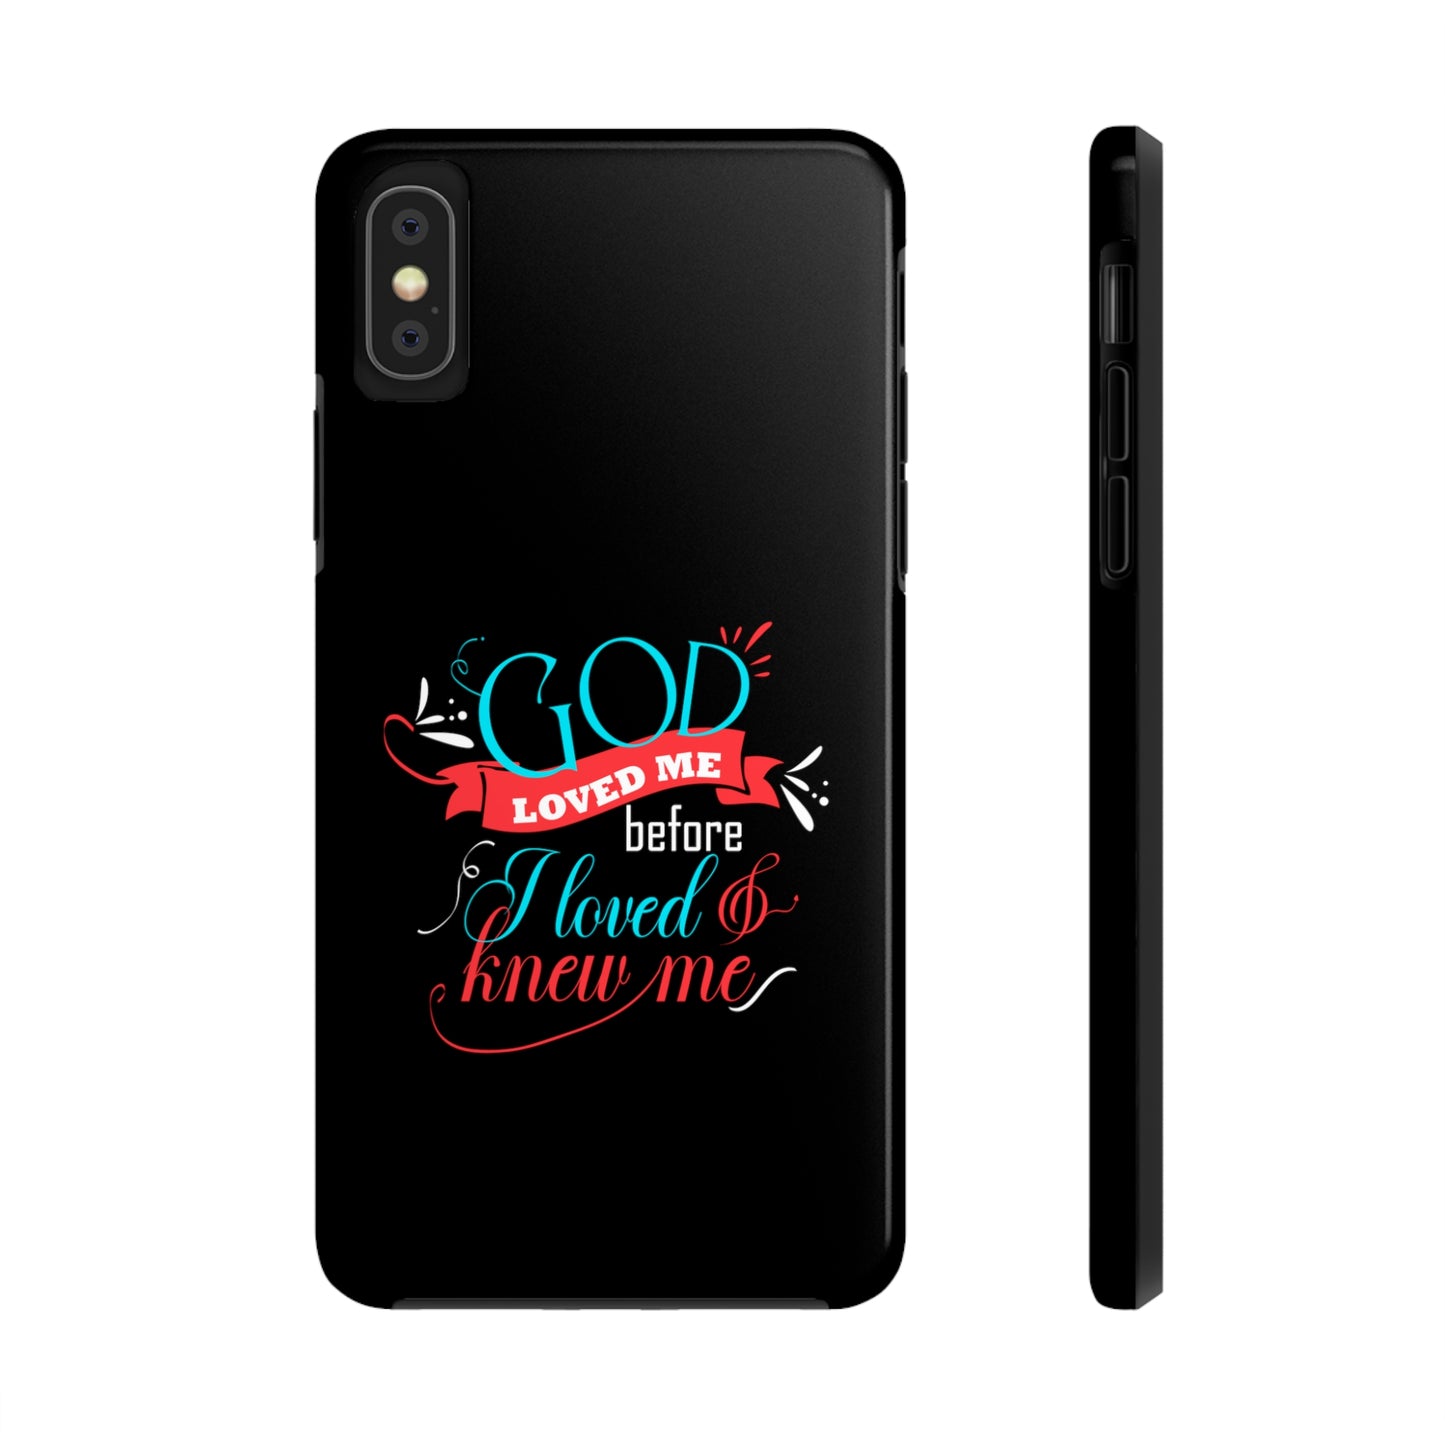 God Loved Me Before I Loved & Knew Me Tough Phone Cases, Case-Mate